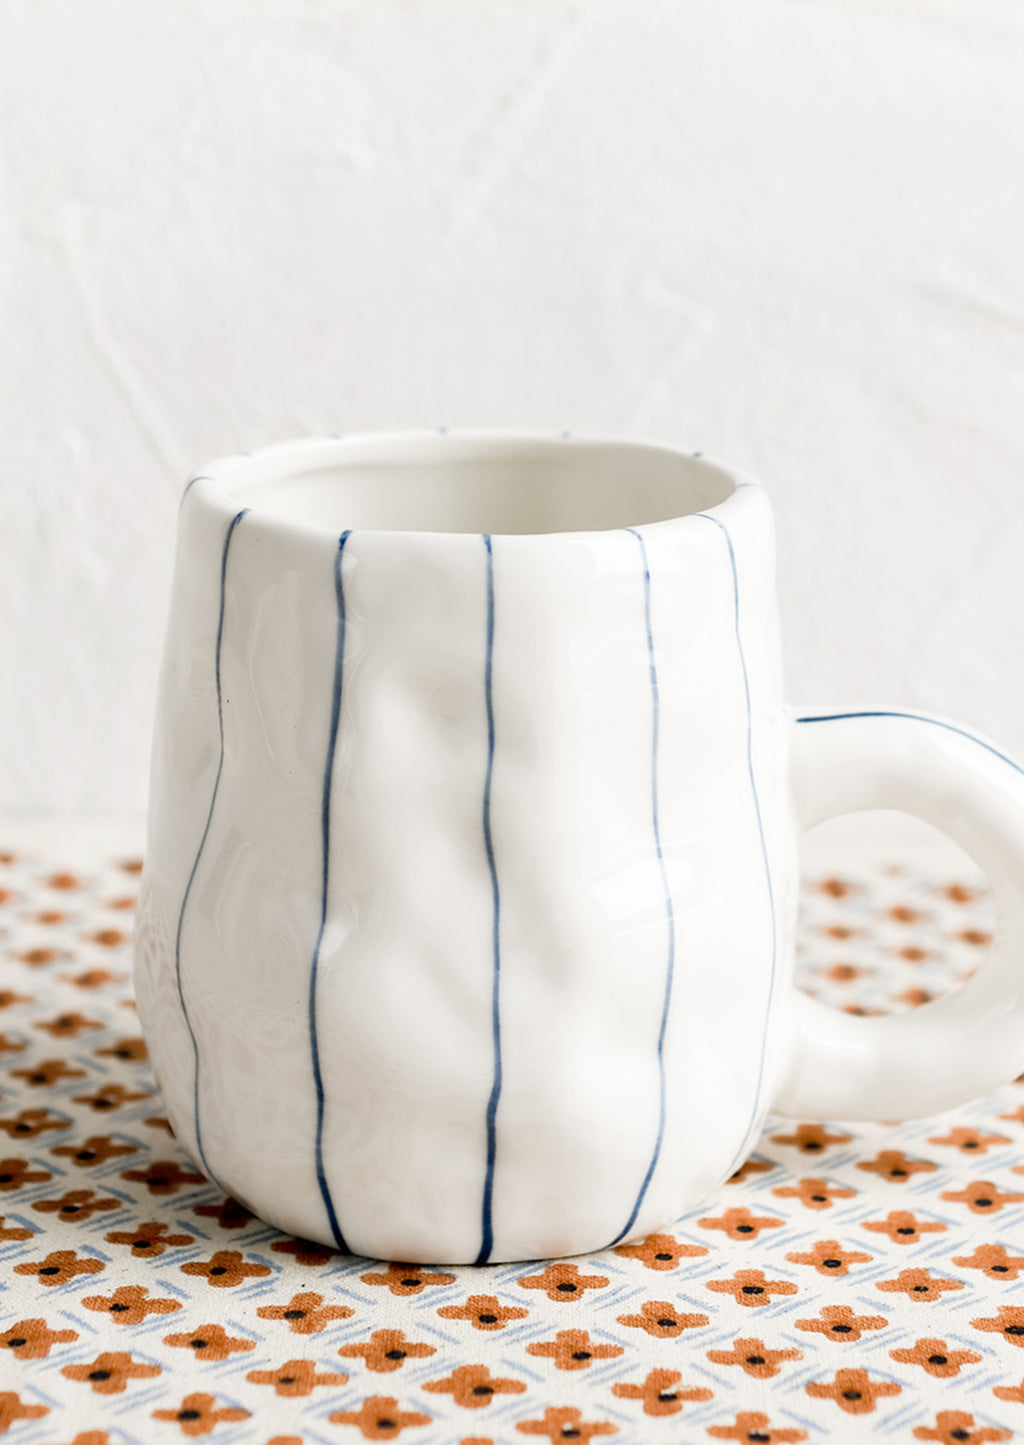 3: A pinched white mug with vertical thin blue stripes.